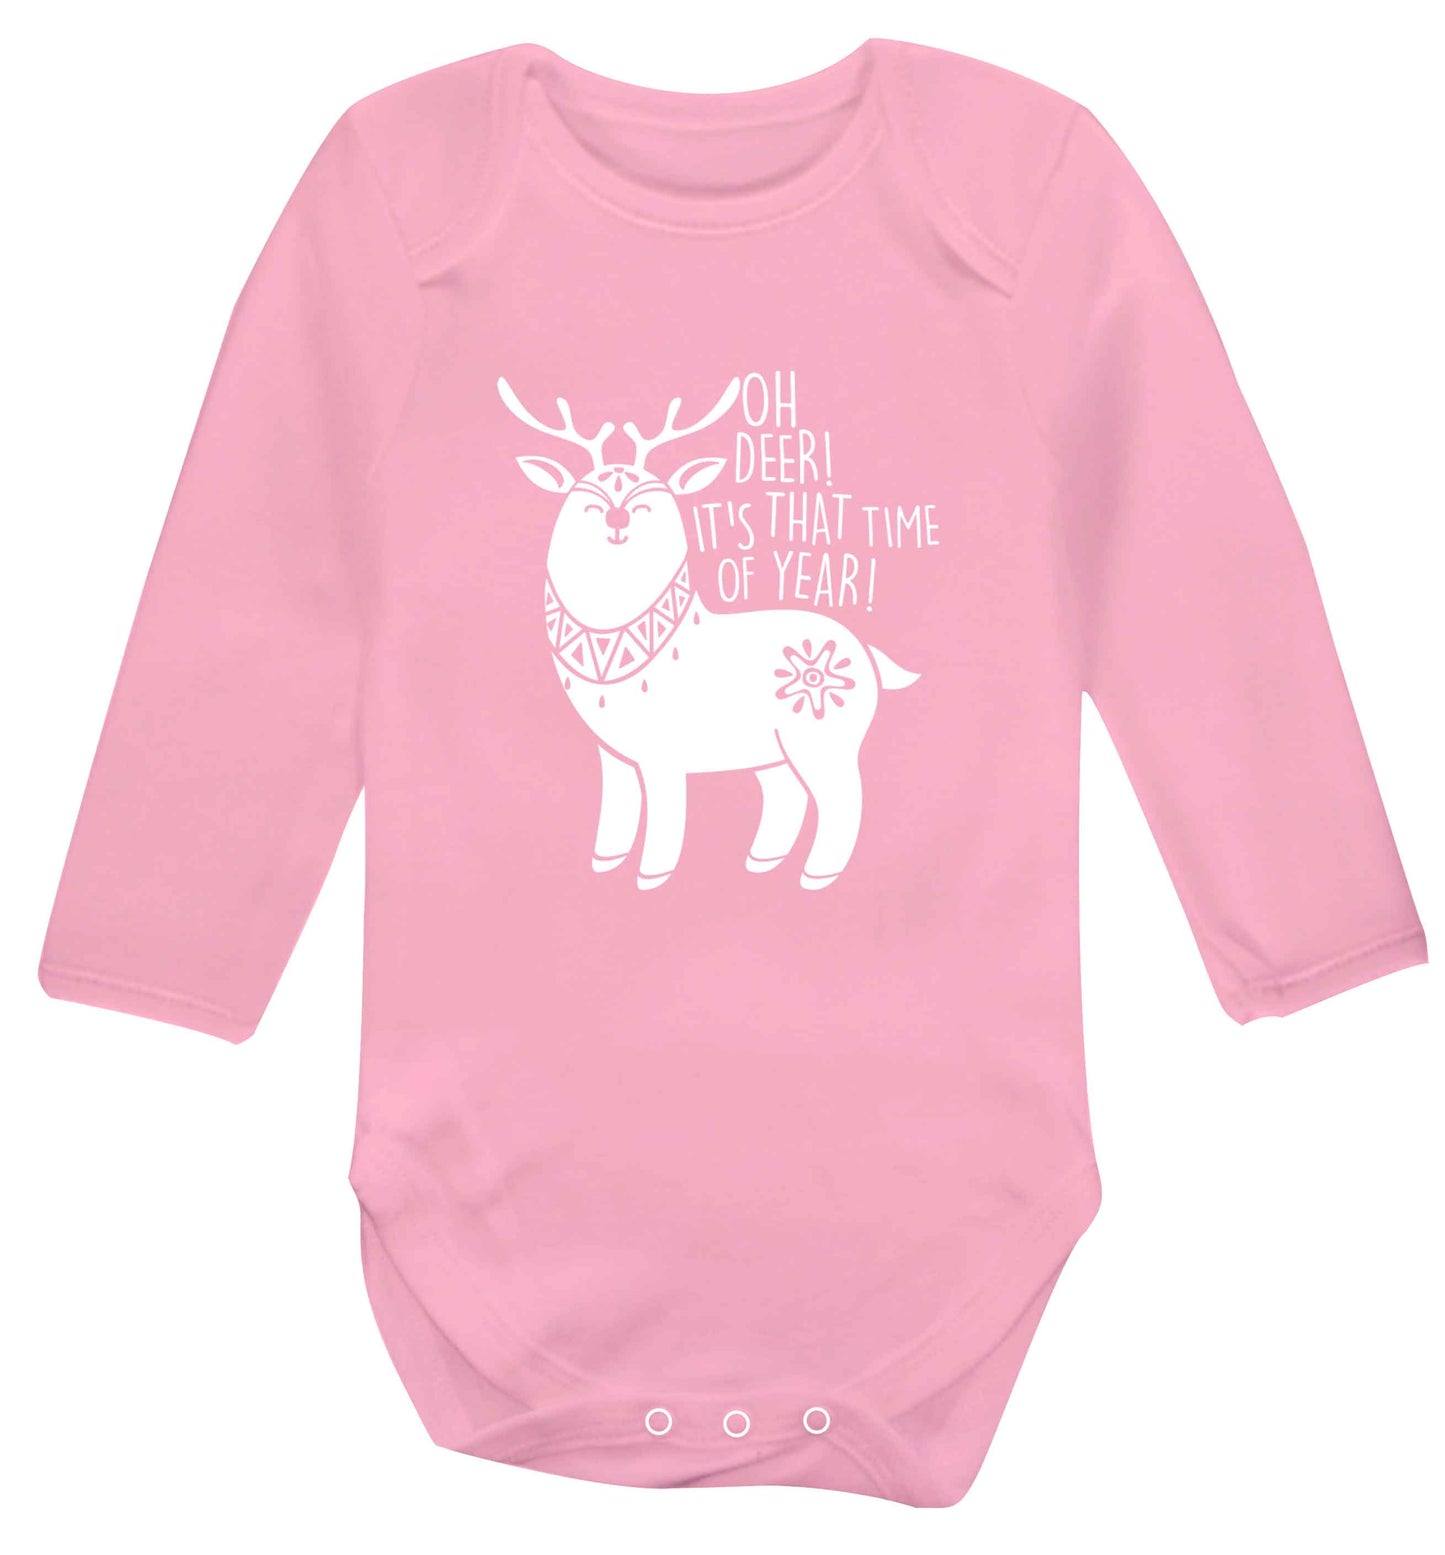 Oh dear it's that time of year Baby Vest long sleeved pale pink 6-12 months